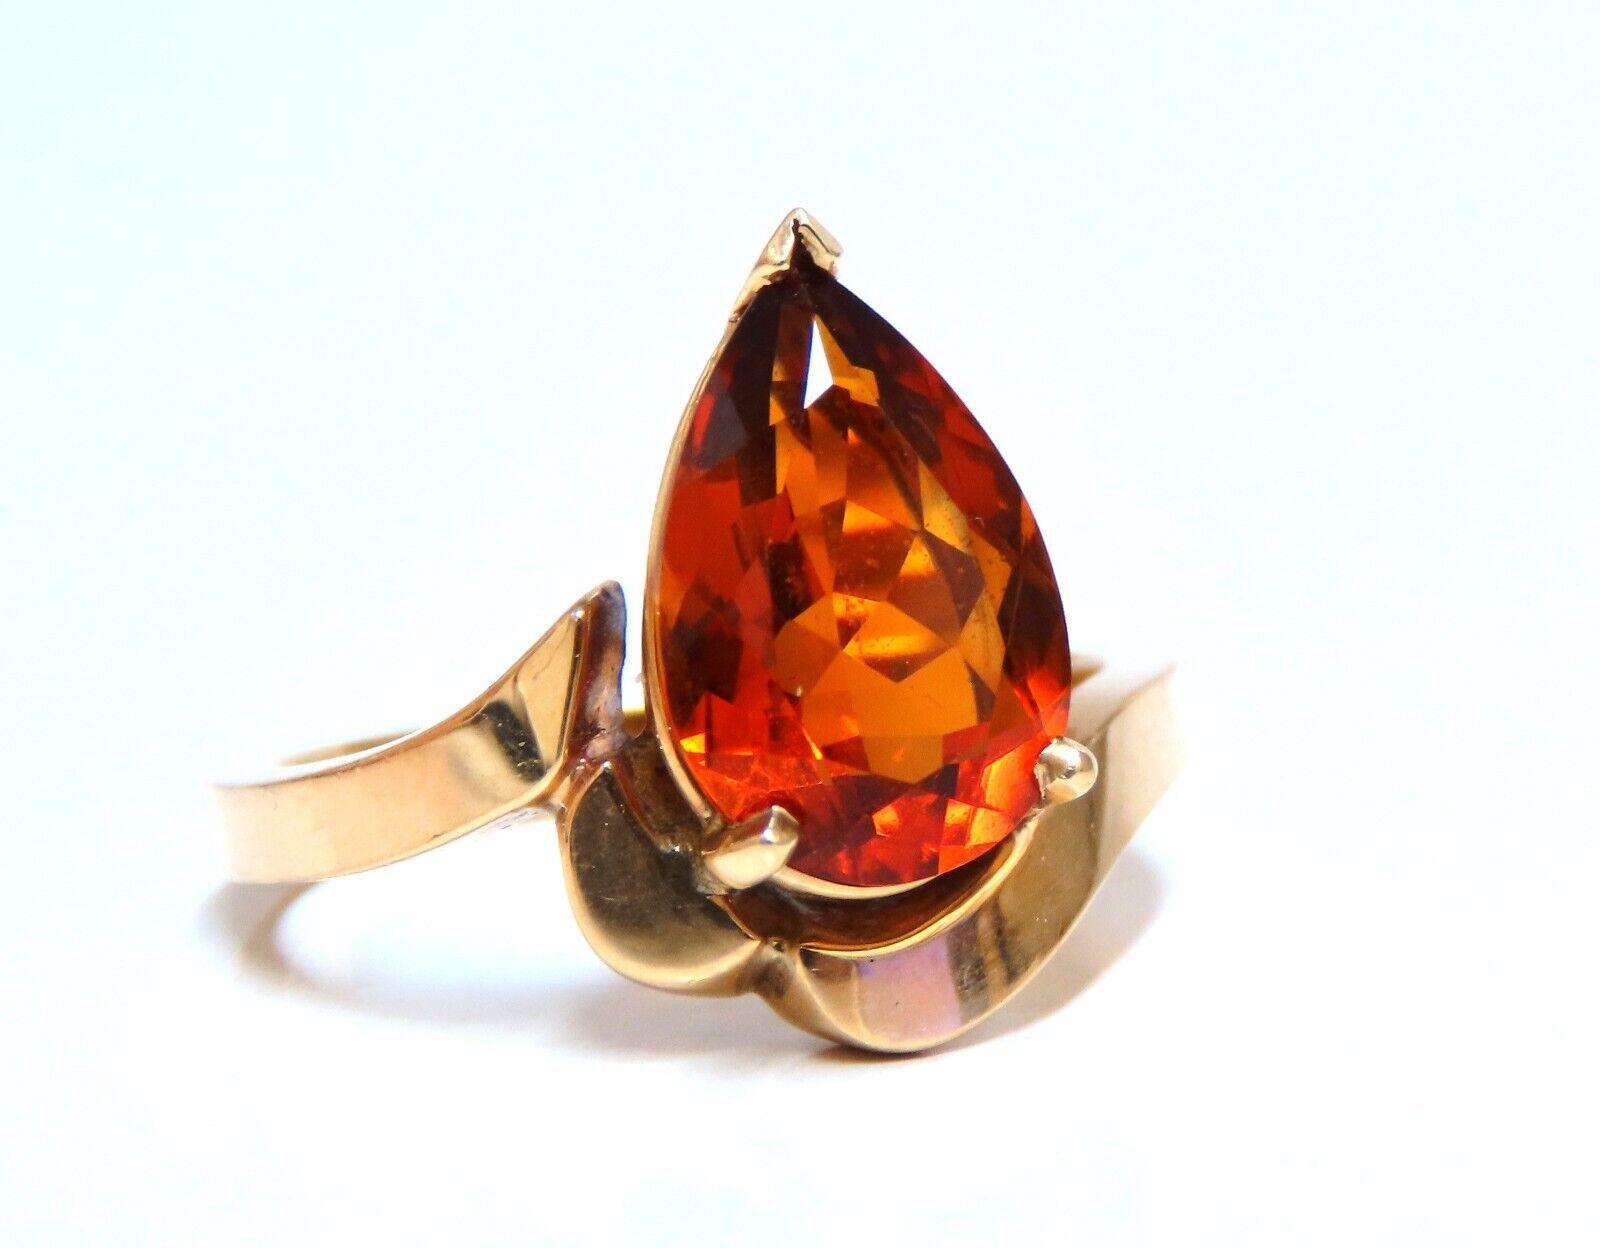 4ct Natural Pear shape Garnet ring.

10 x 7mm Garnet.

Clean clarity and transparent.

Dark orange color.

14kt yellow gold

4.2 grams

We may resize.